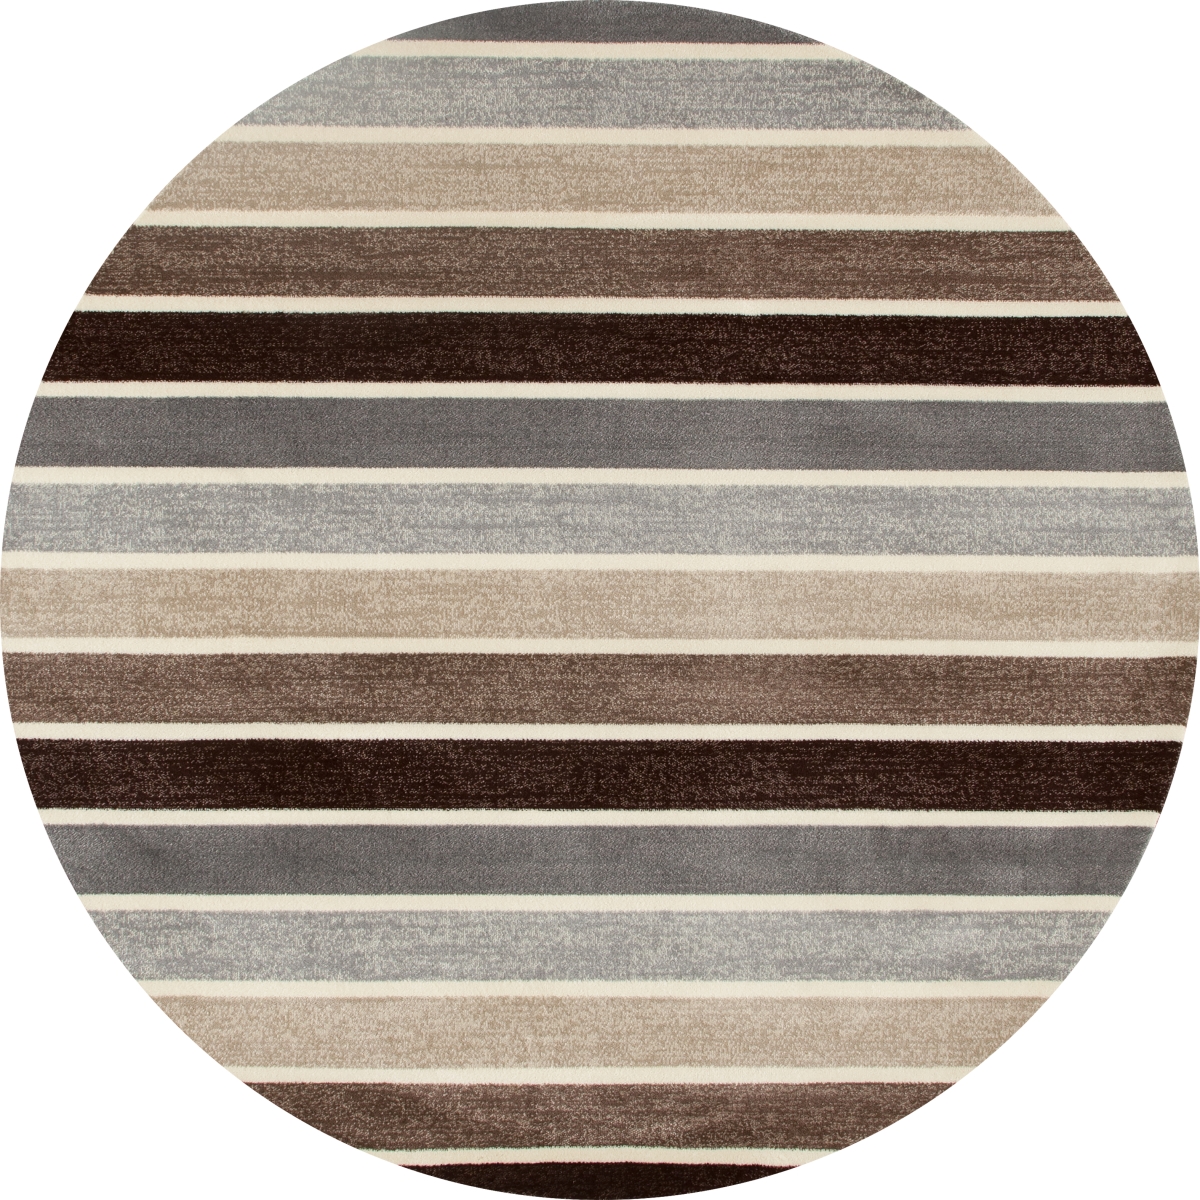 25719 5 Ft. Troy Collection Mainline Woven Round Area Rug, Brown